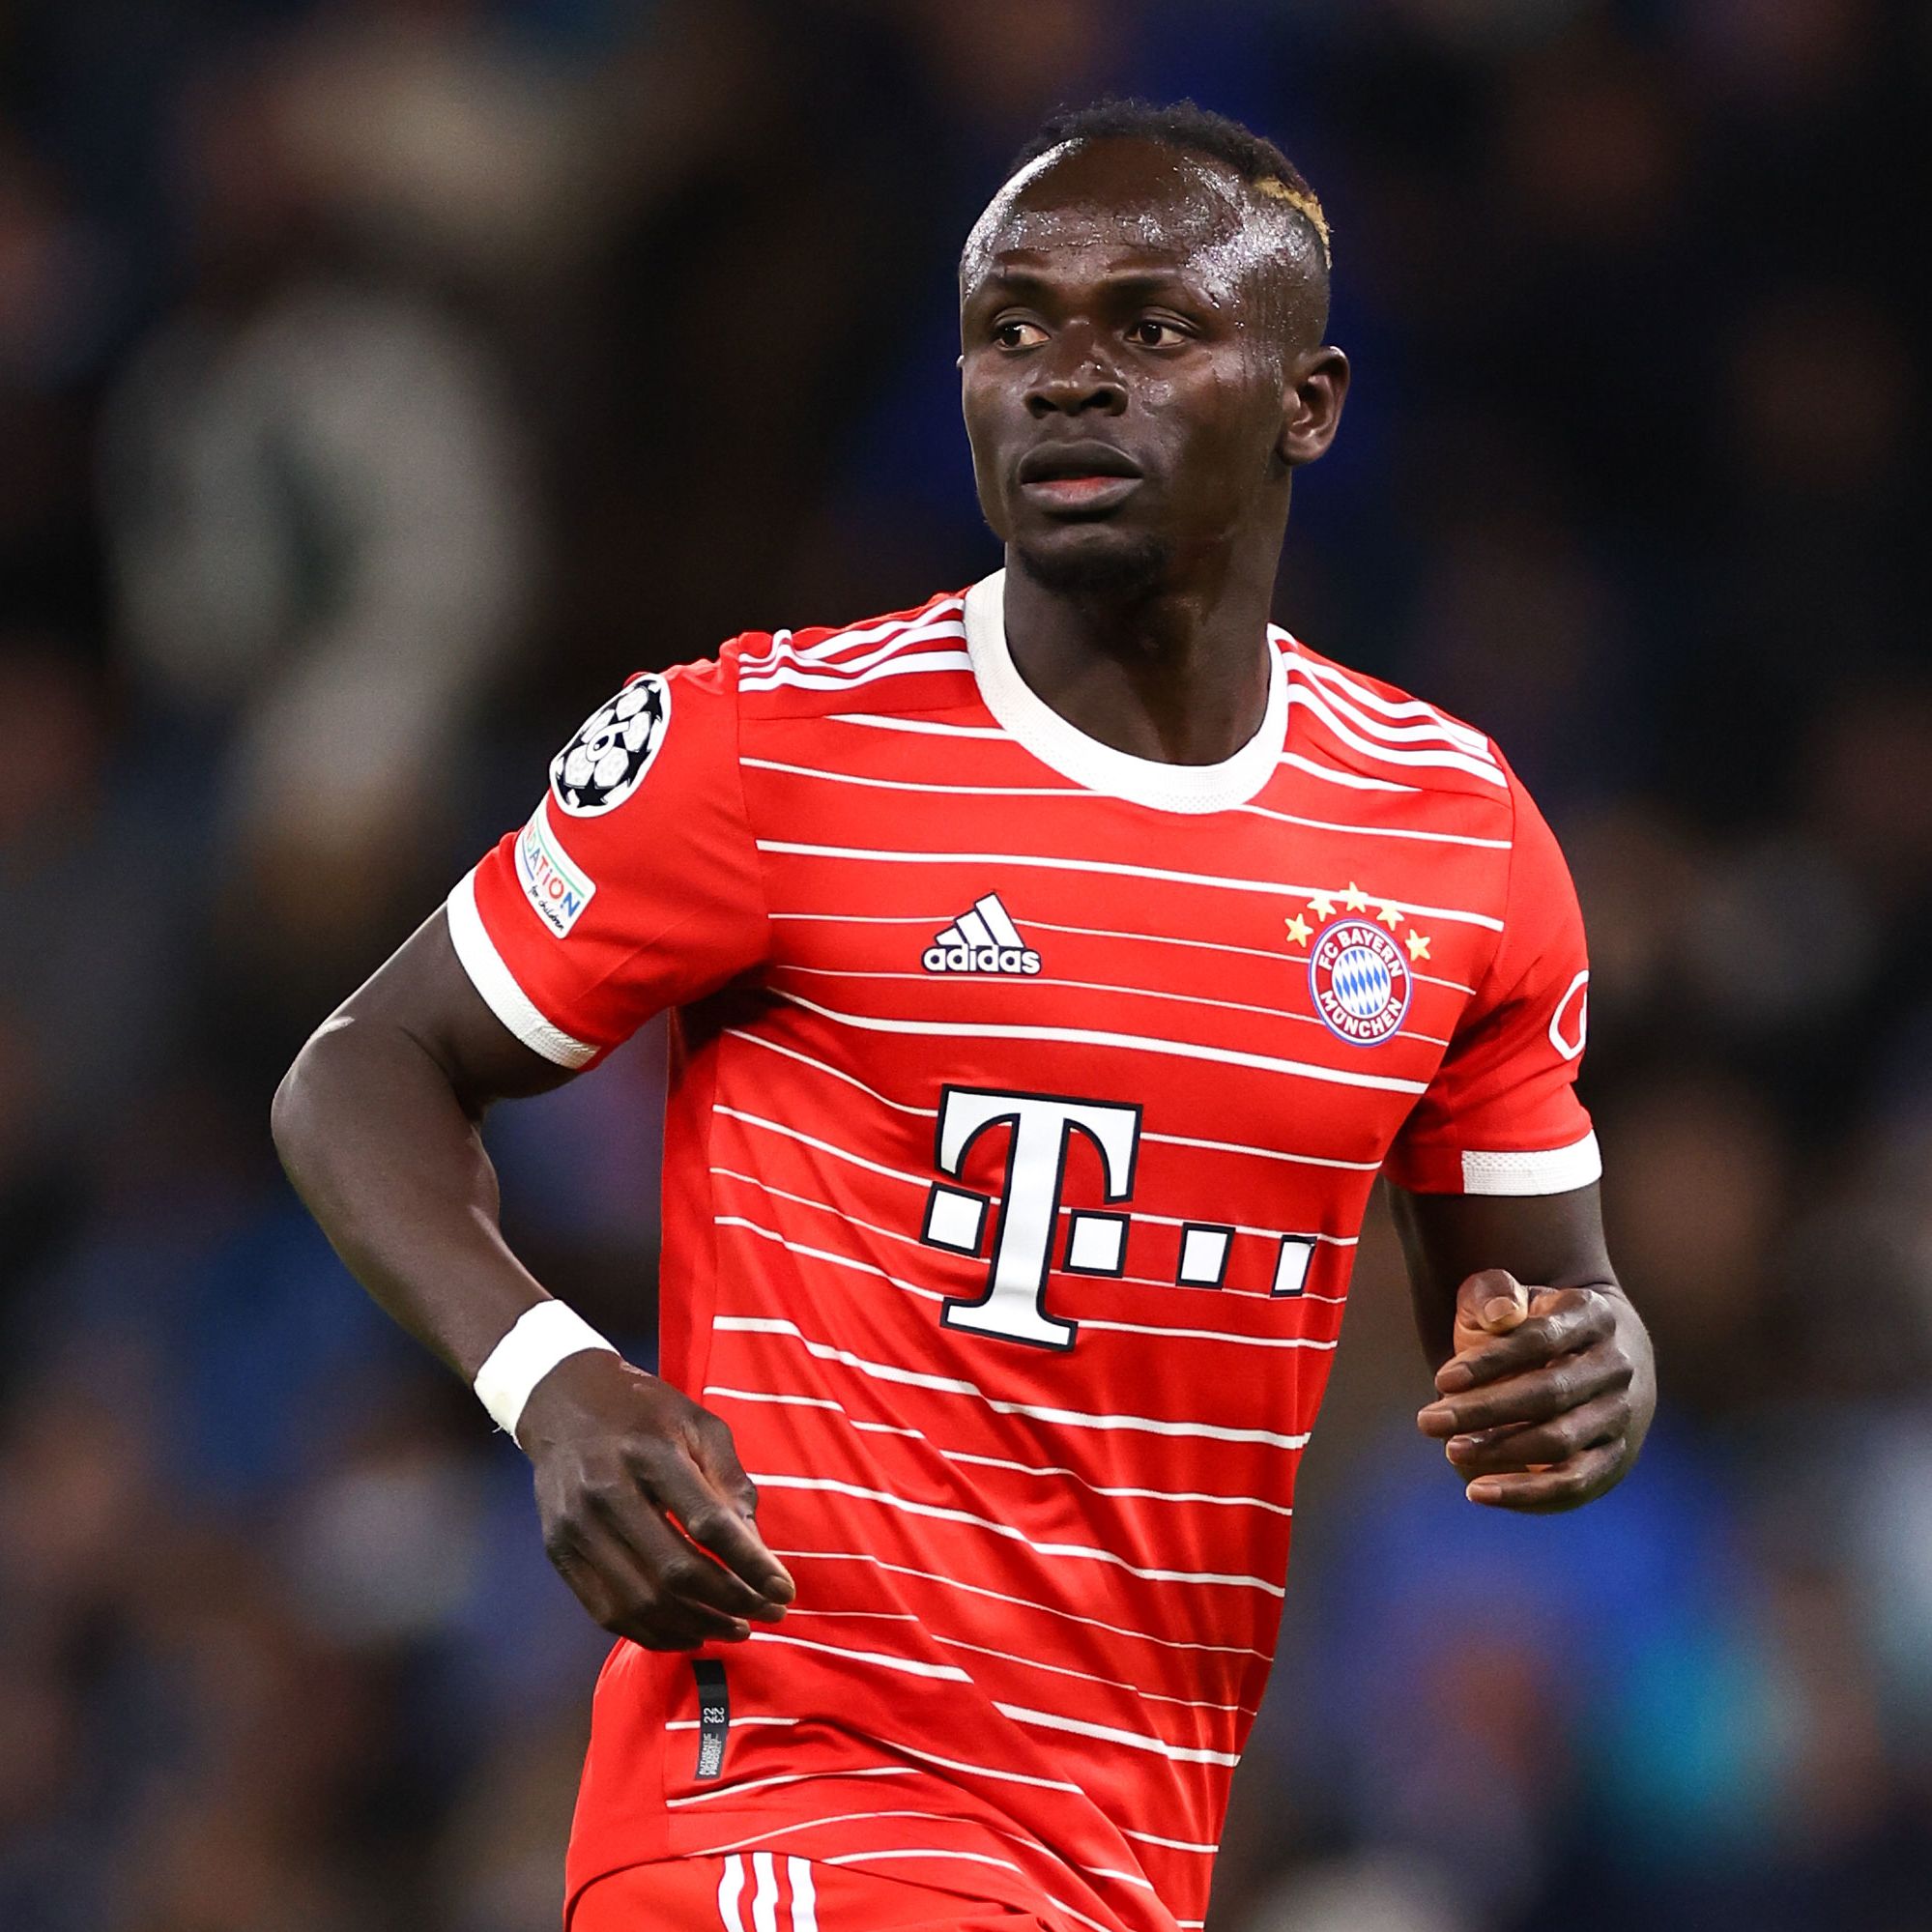 Sadio Mané removed from Bayern Munich squad for one match after 'misconduct' following Champions League defeat | CNN